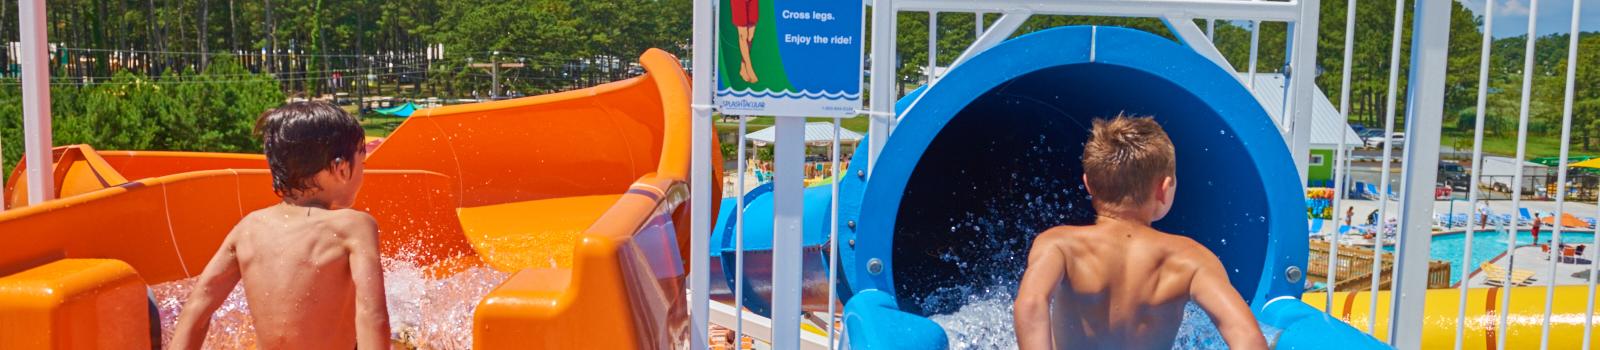 Race to the bottom at Maui Jack's Waterpark